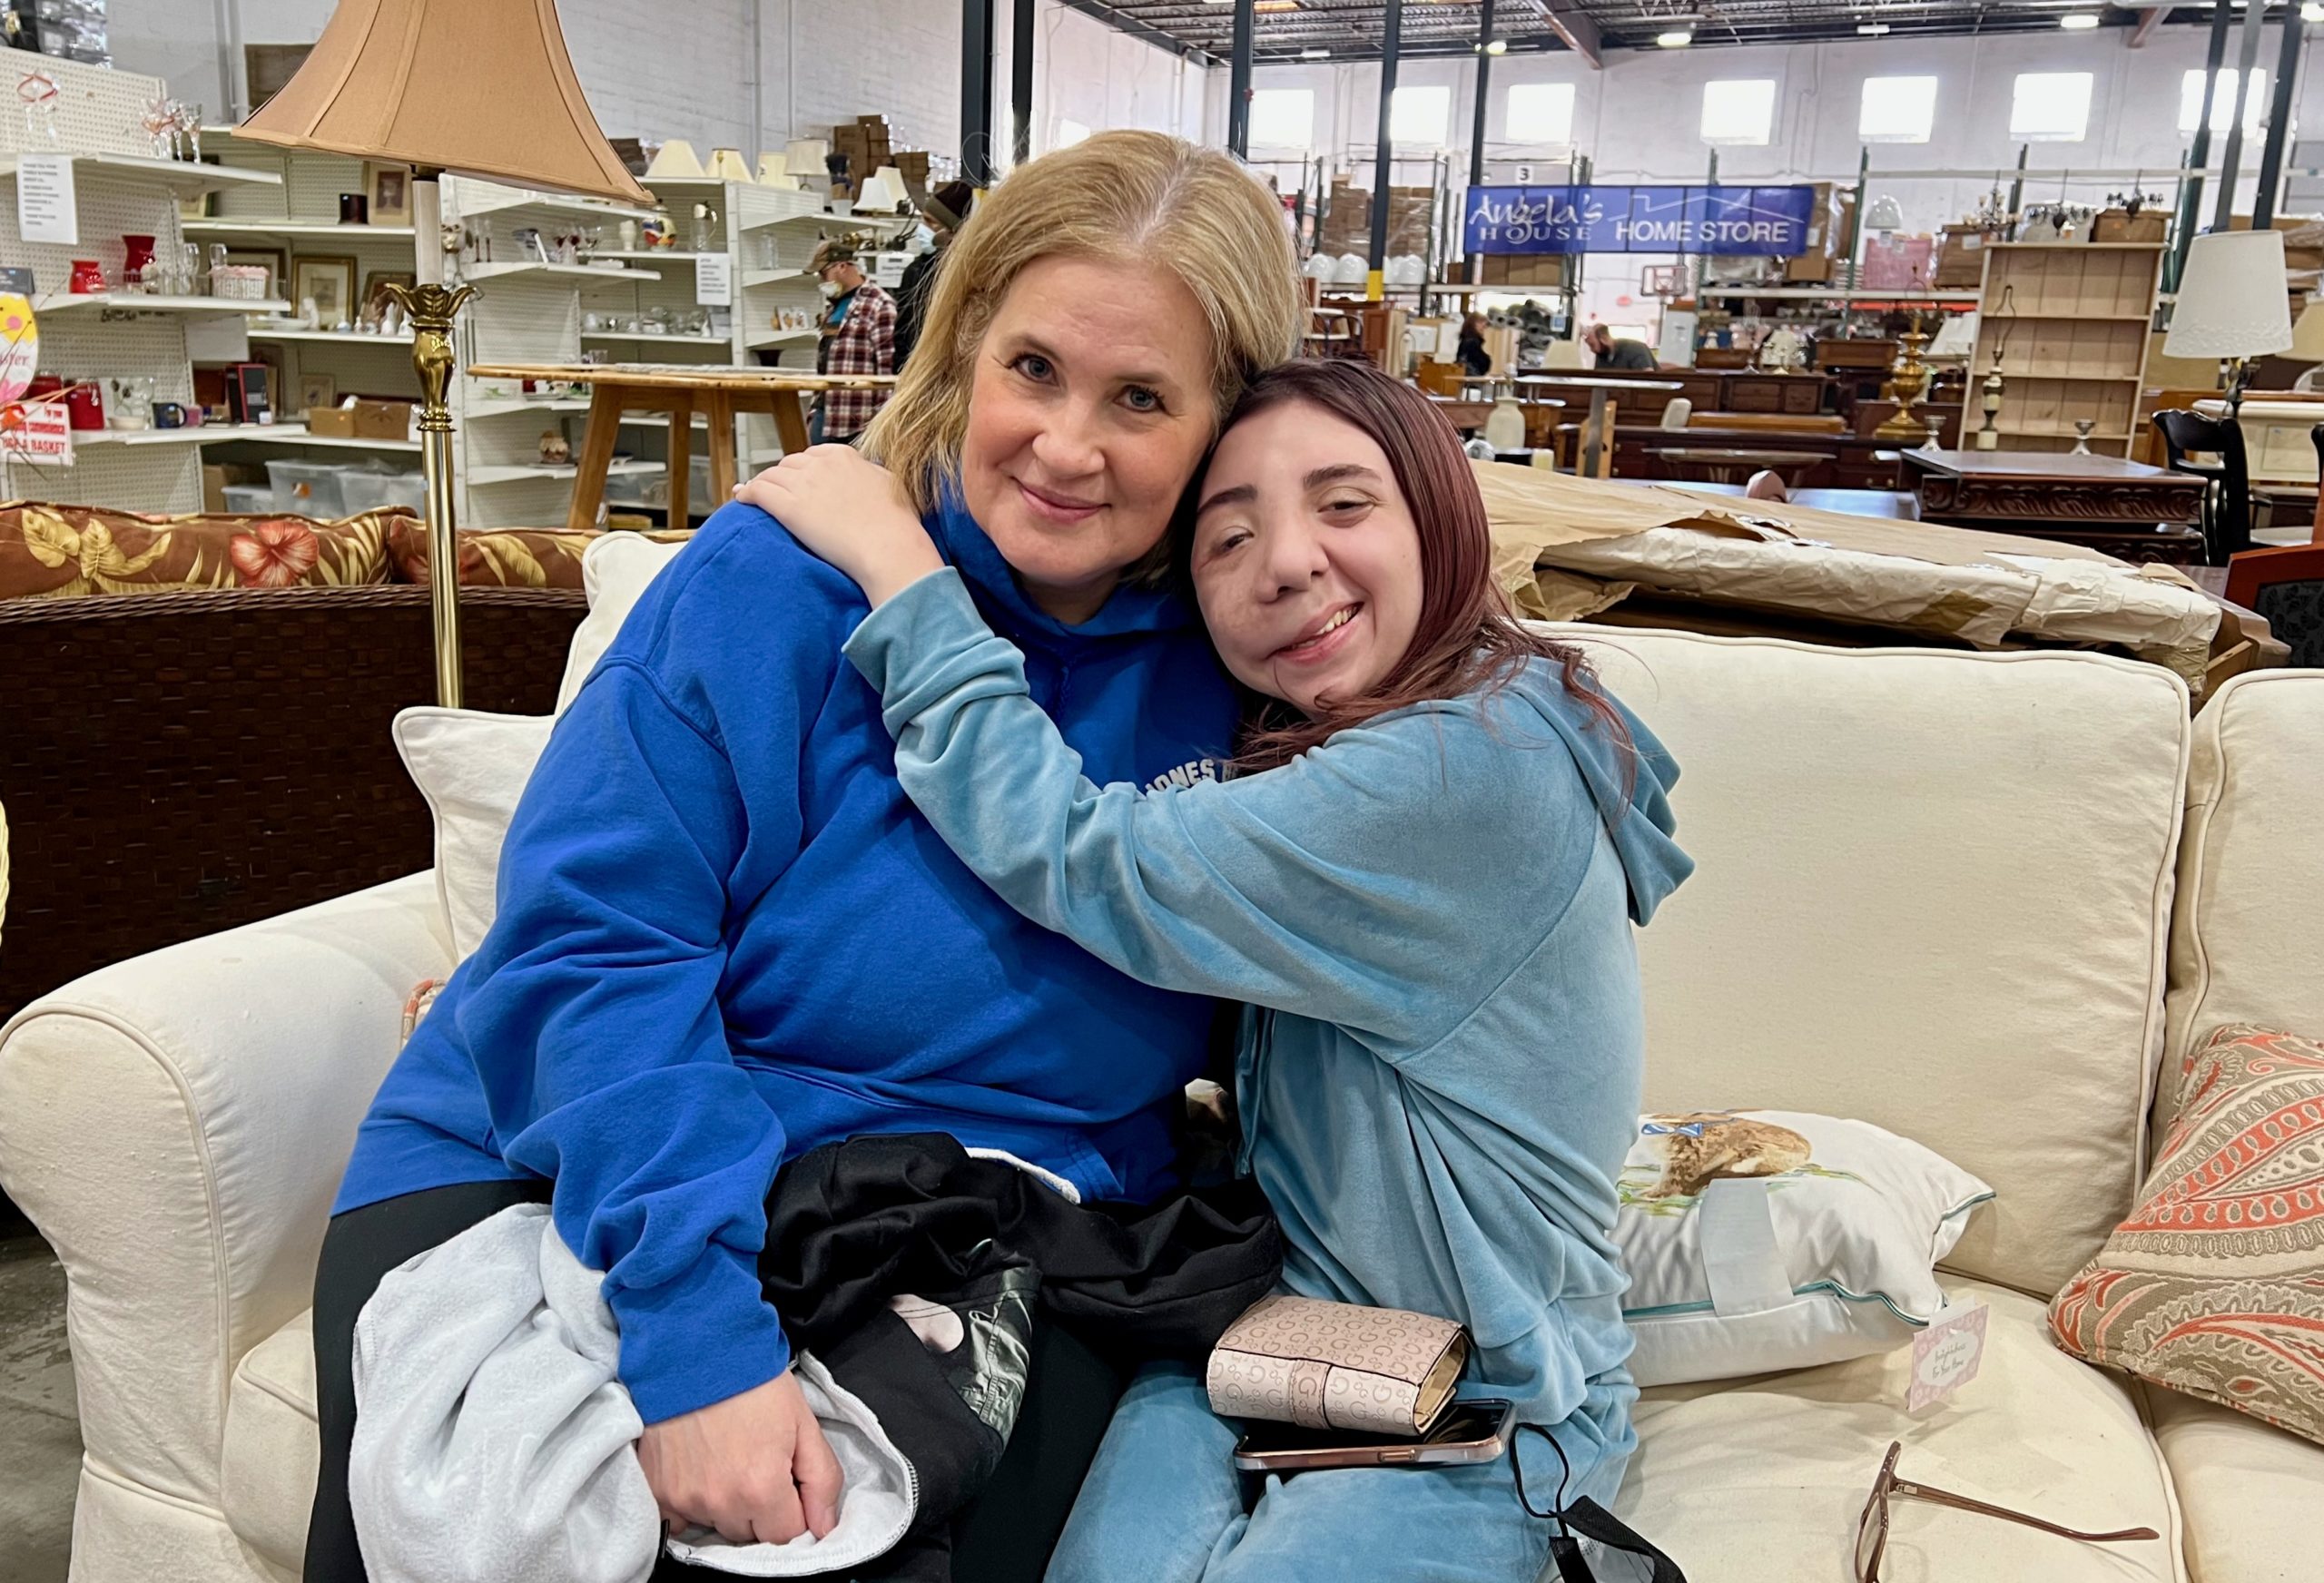 Jessica Lindberg, a nurse case manager, with Gina DiMartino at Angela's House Home Store in Medford. (Michael White)